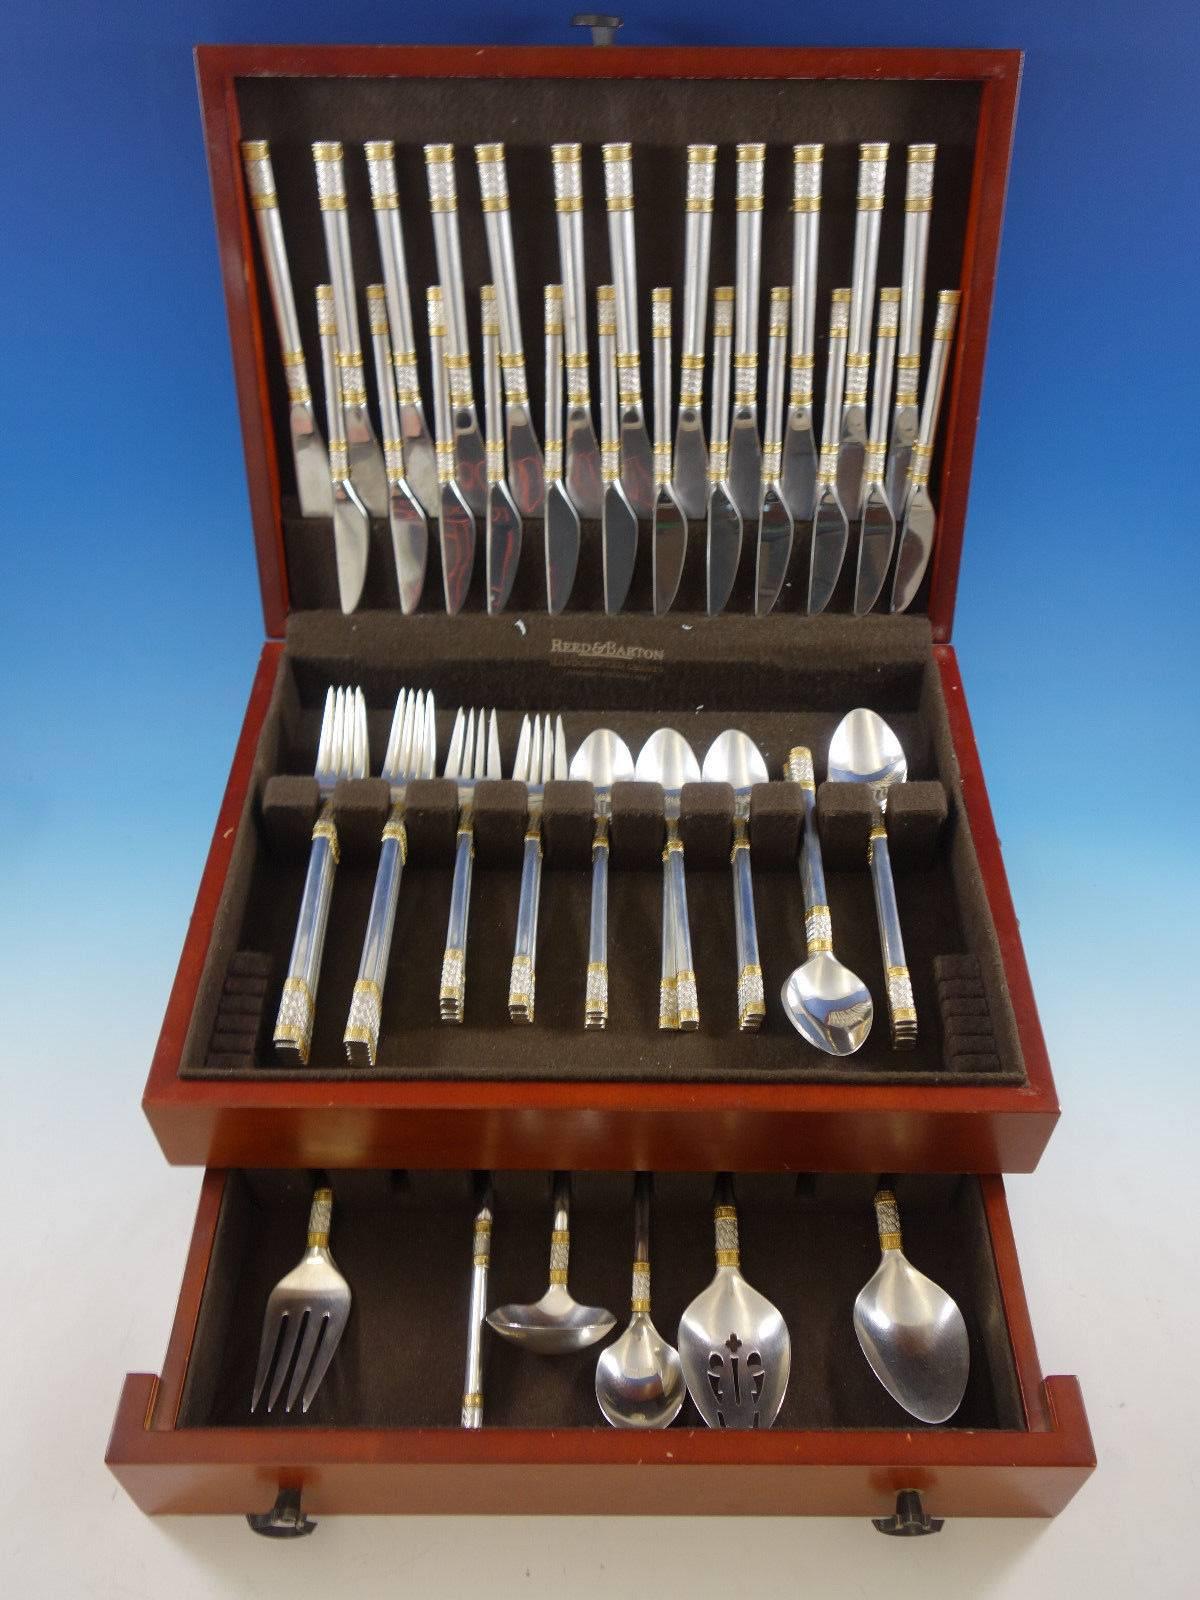 Exquisite Aegean weave gold accent by Wallace sterling silver flatware set, 78 pieces. This set includes:

12 knives, 9 3/8